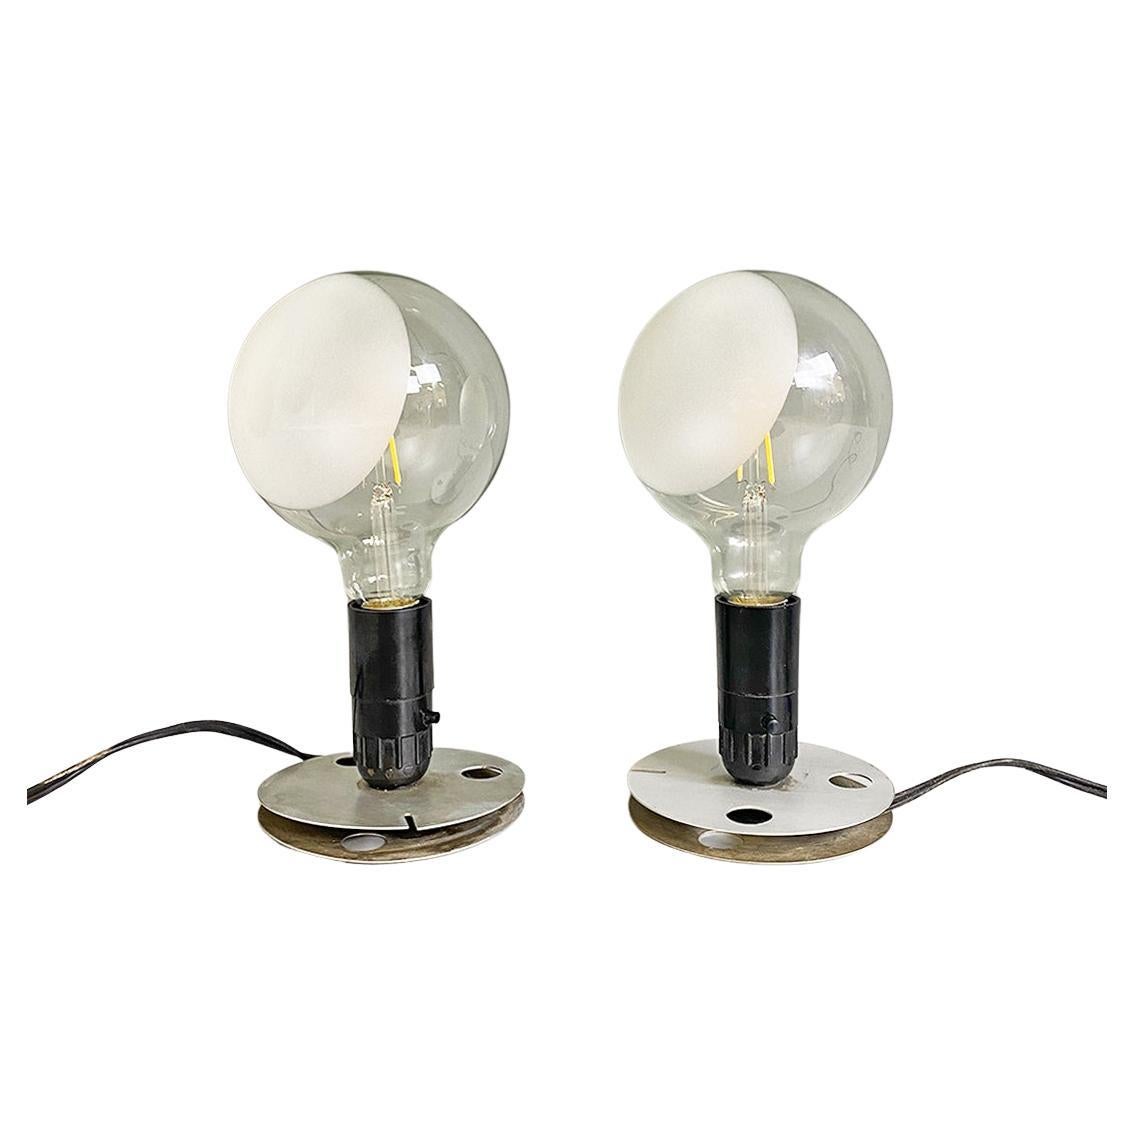 Italian Modern Pair of Lampadina Table Lamps by Castiglioni's for Flos, 1972